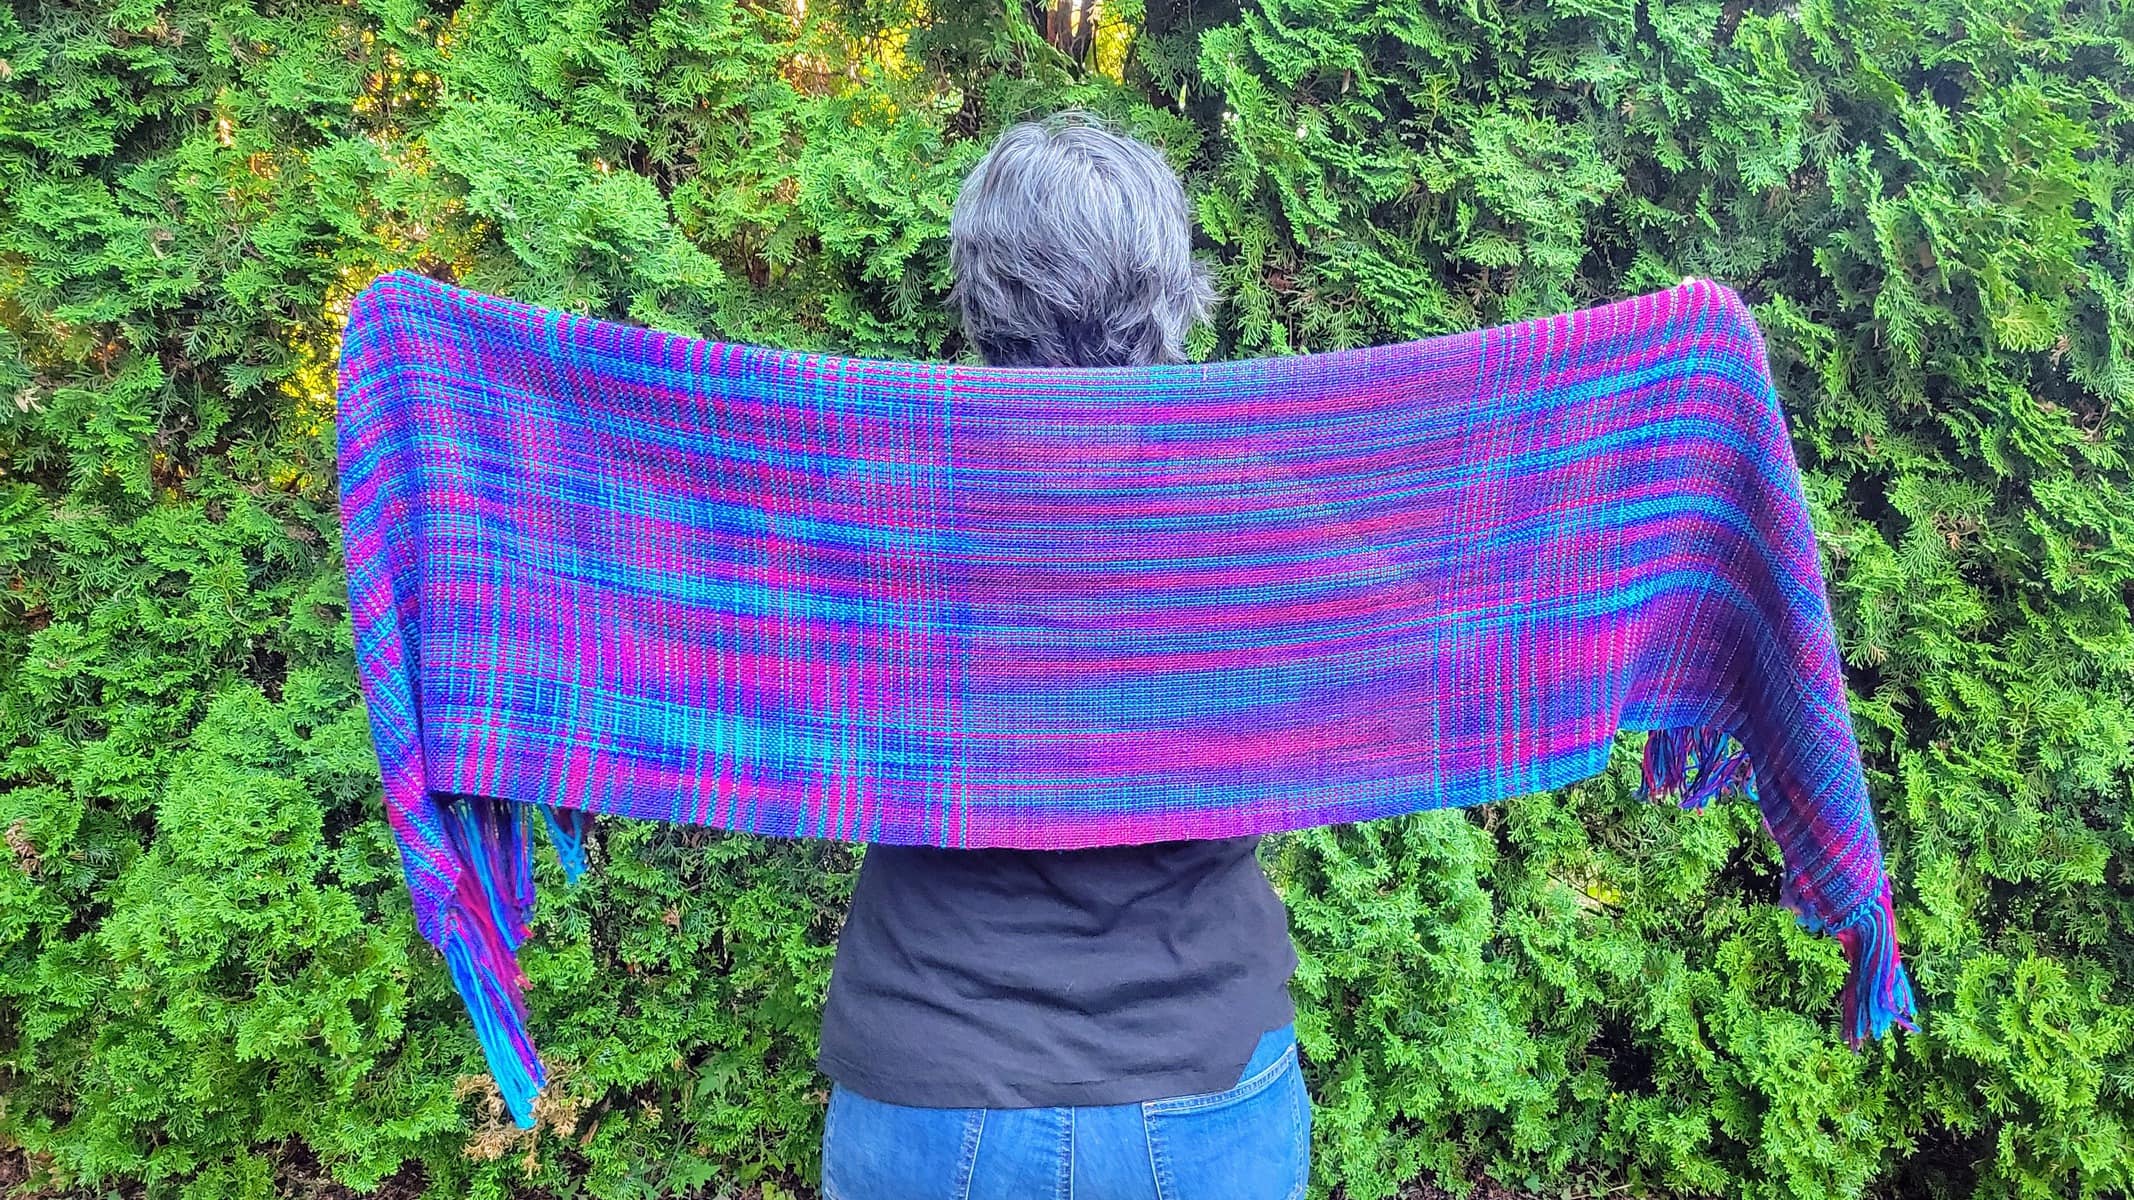 Image description: Grey-haired woman photographed from behind, holding a shawl out in both hands, in shades of blue and purple.